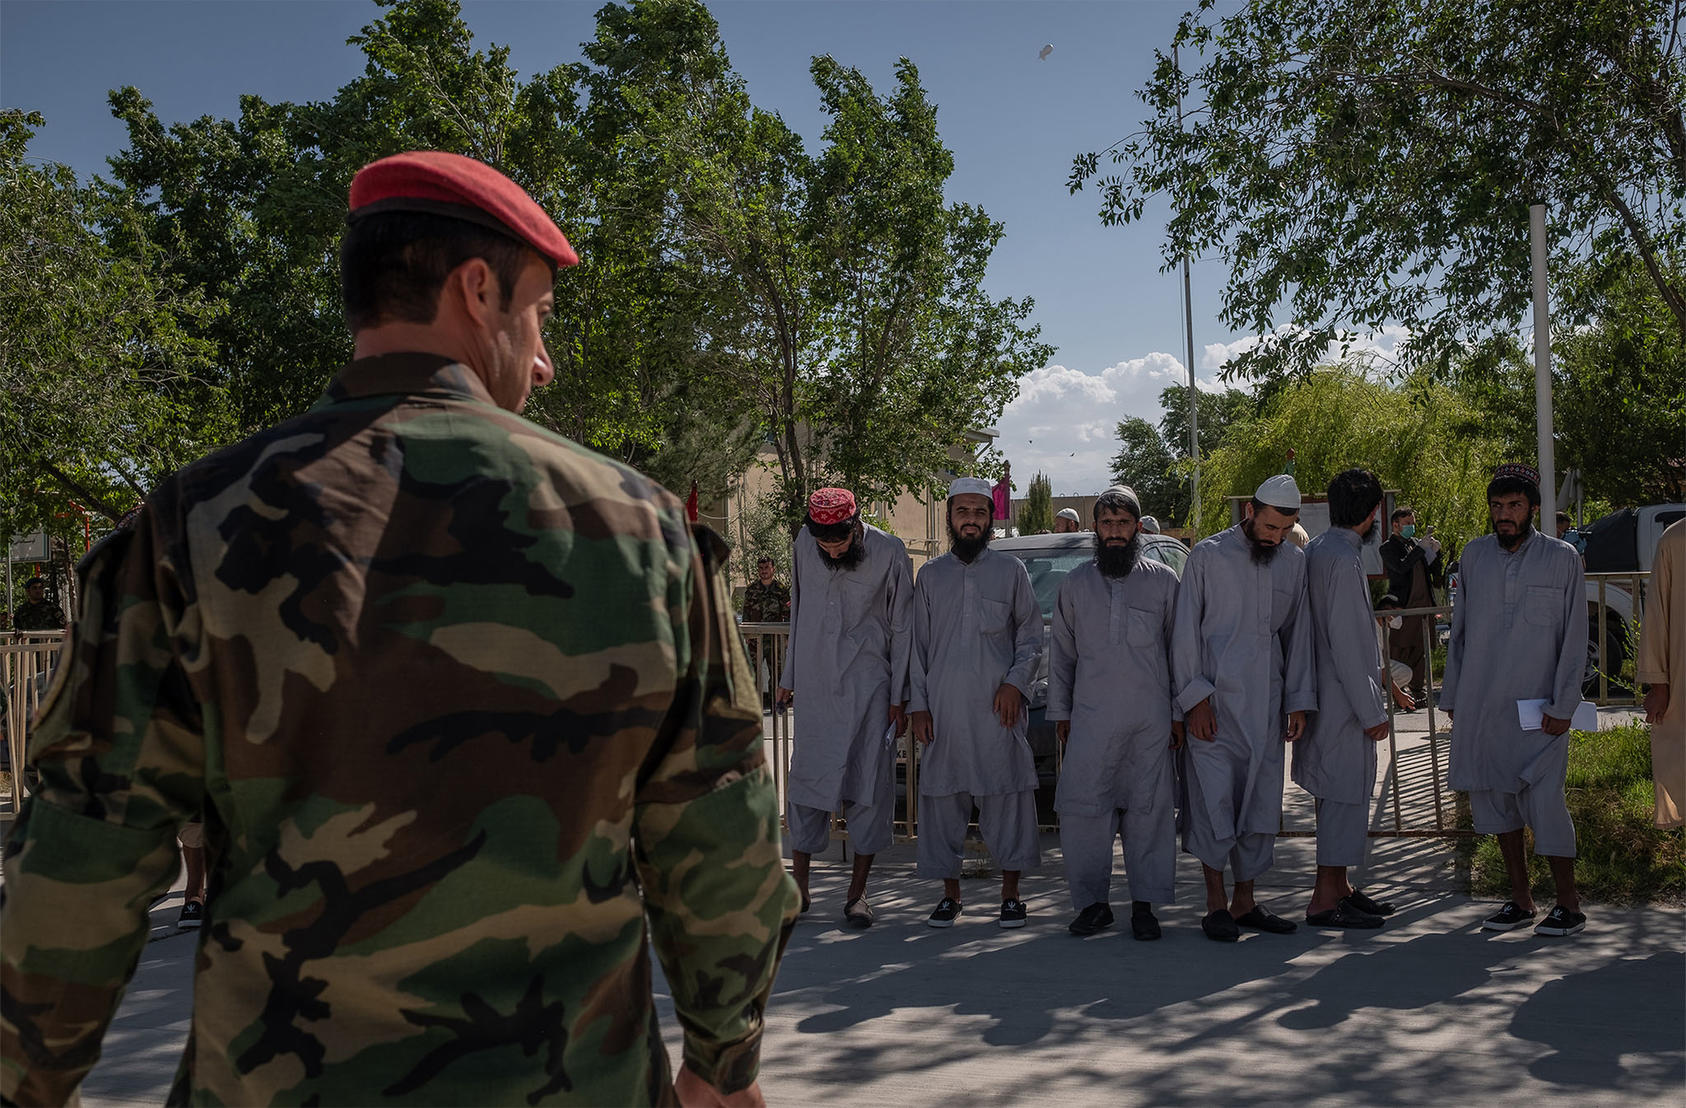 Taliban prisoners are lined up at the Bagram military base before being released in Afghanistan, May 26, 2020. (Jim Huylebroek/The New York Times)